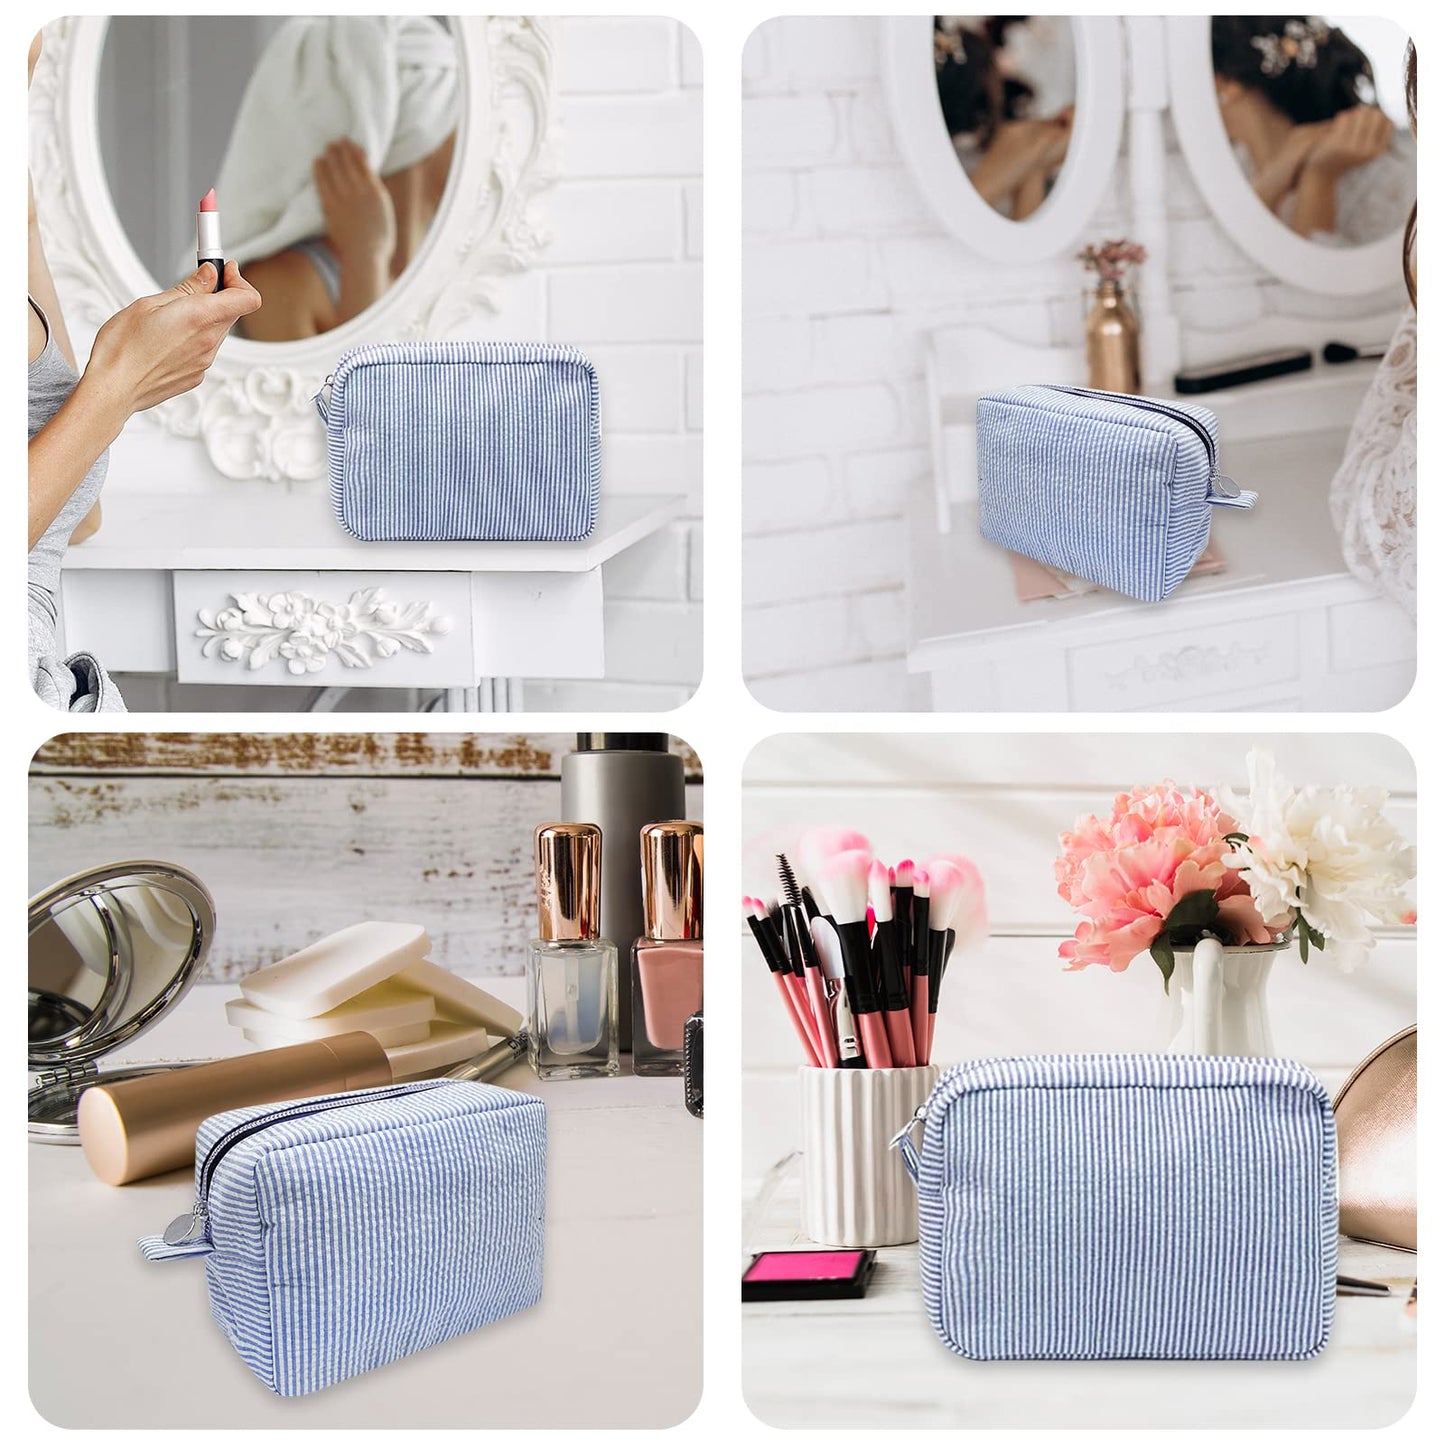 GFU Makeup Bag for Women, Cute Cosmetic Bag, Lightweight Toiletry Make up Bag, Large Seersucker Aesthetic Organizer Storage Pouch for Girls, Women and Moms Gifts, Blue